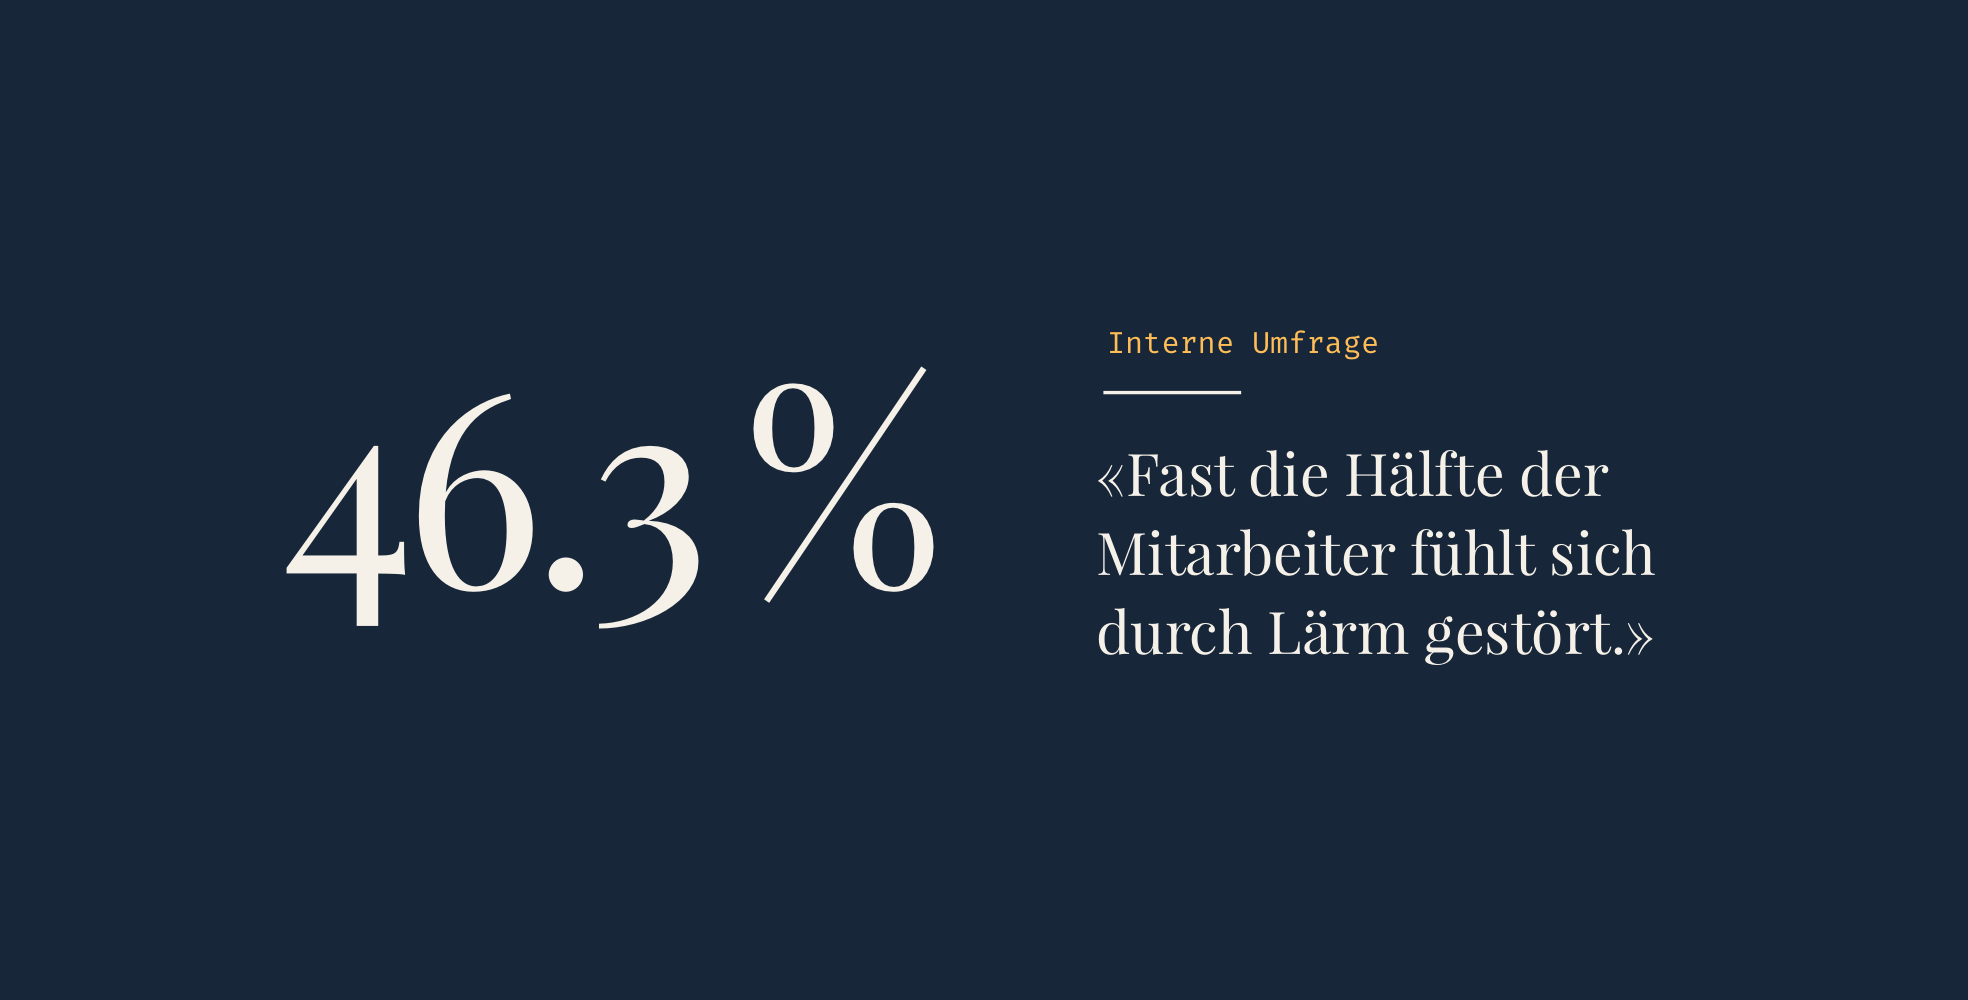 01 isolutions PostParc Better Spaces Case Study Umfrage Facts 1